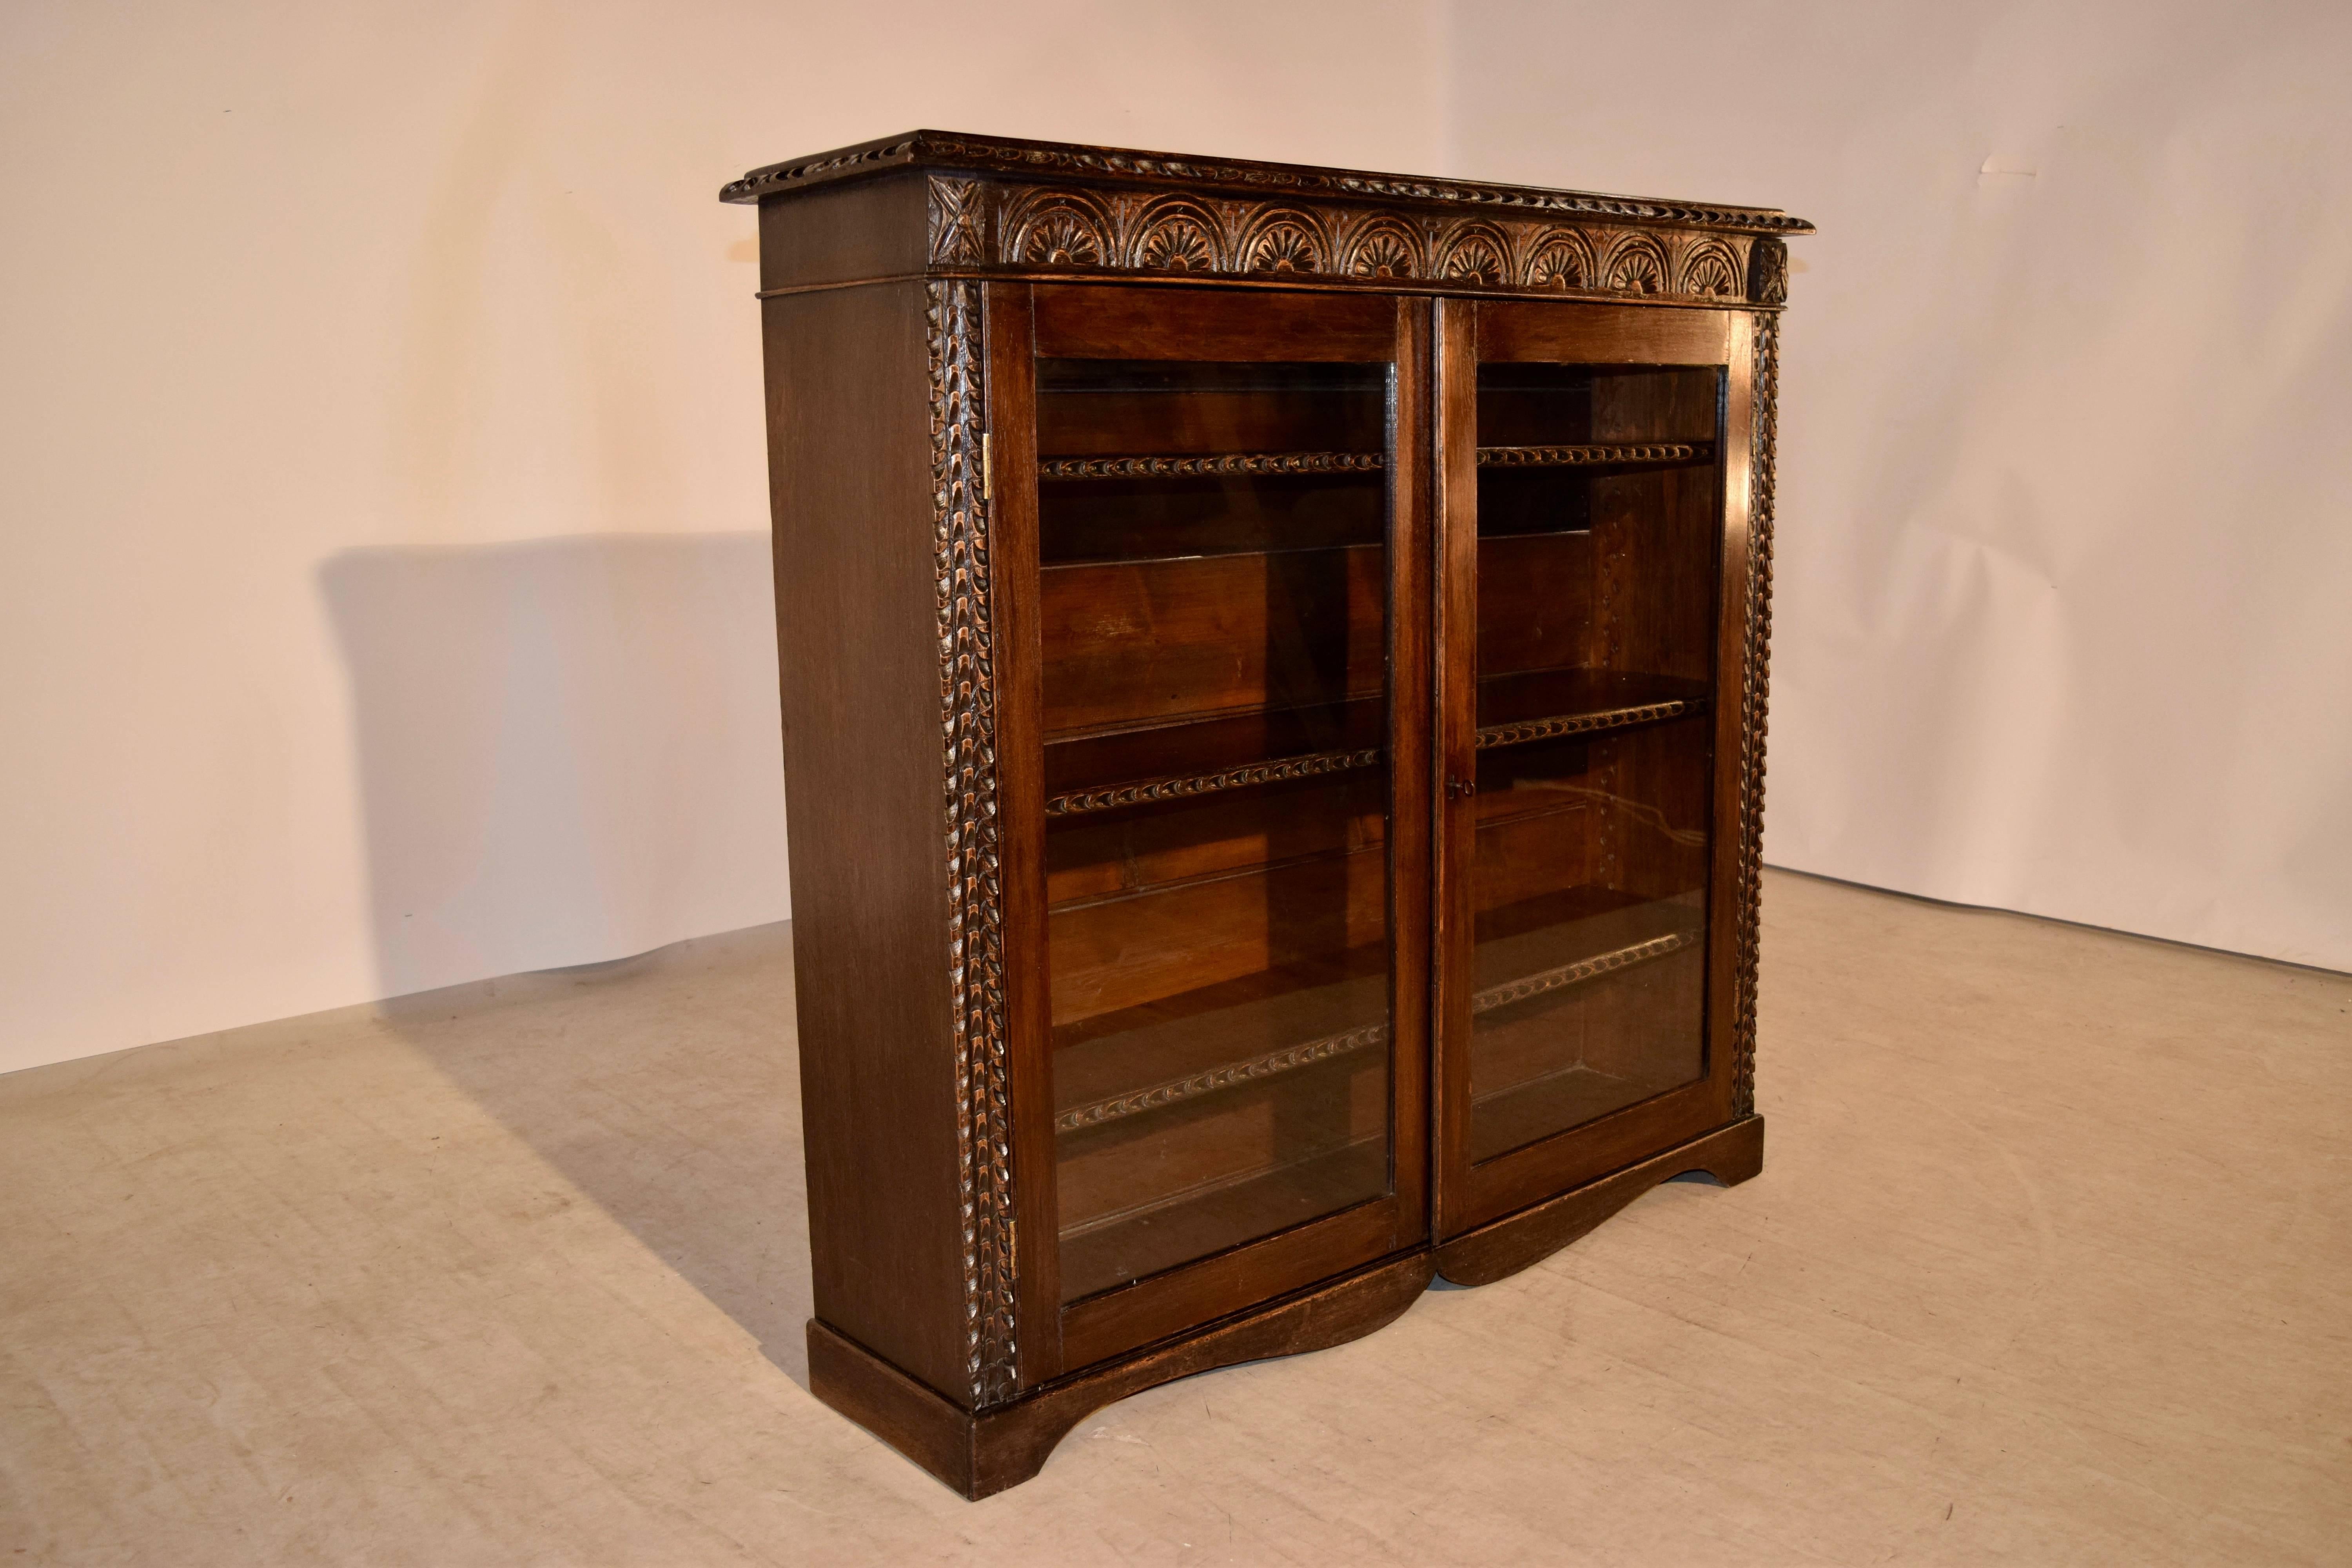 19th century English oak bookcase with glazed doors. The top is made from a single board and has a beveled and hand-carved decorated edge, which follows down to simple sides and a hand-carved apron in the front over two glazed doors, which are